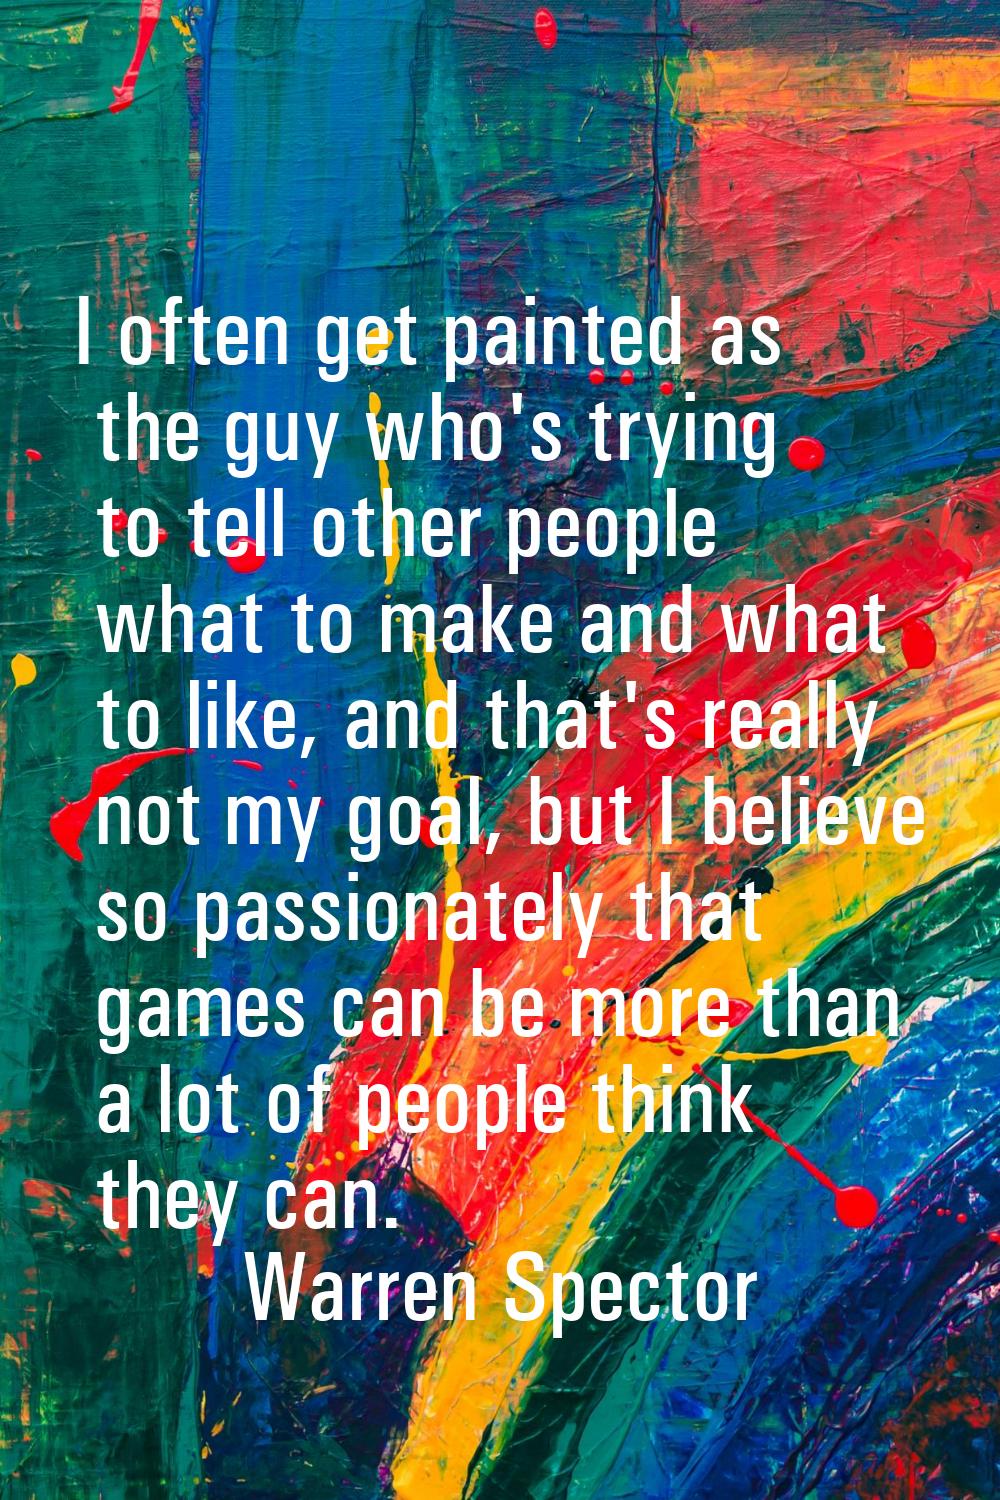 I often get painted as the guy who's trying to tell other people what to make and what to like, and